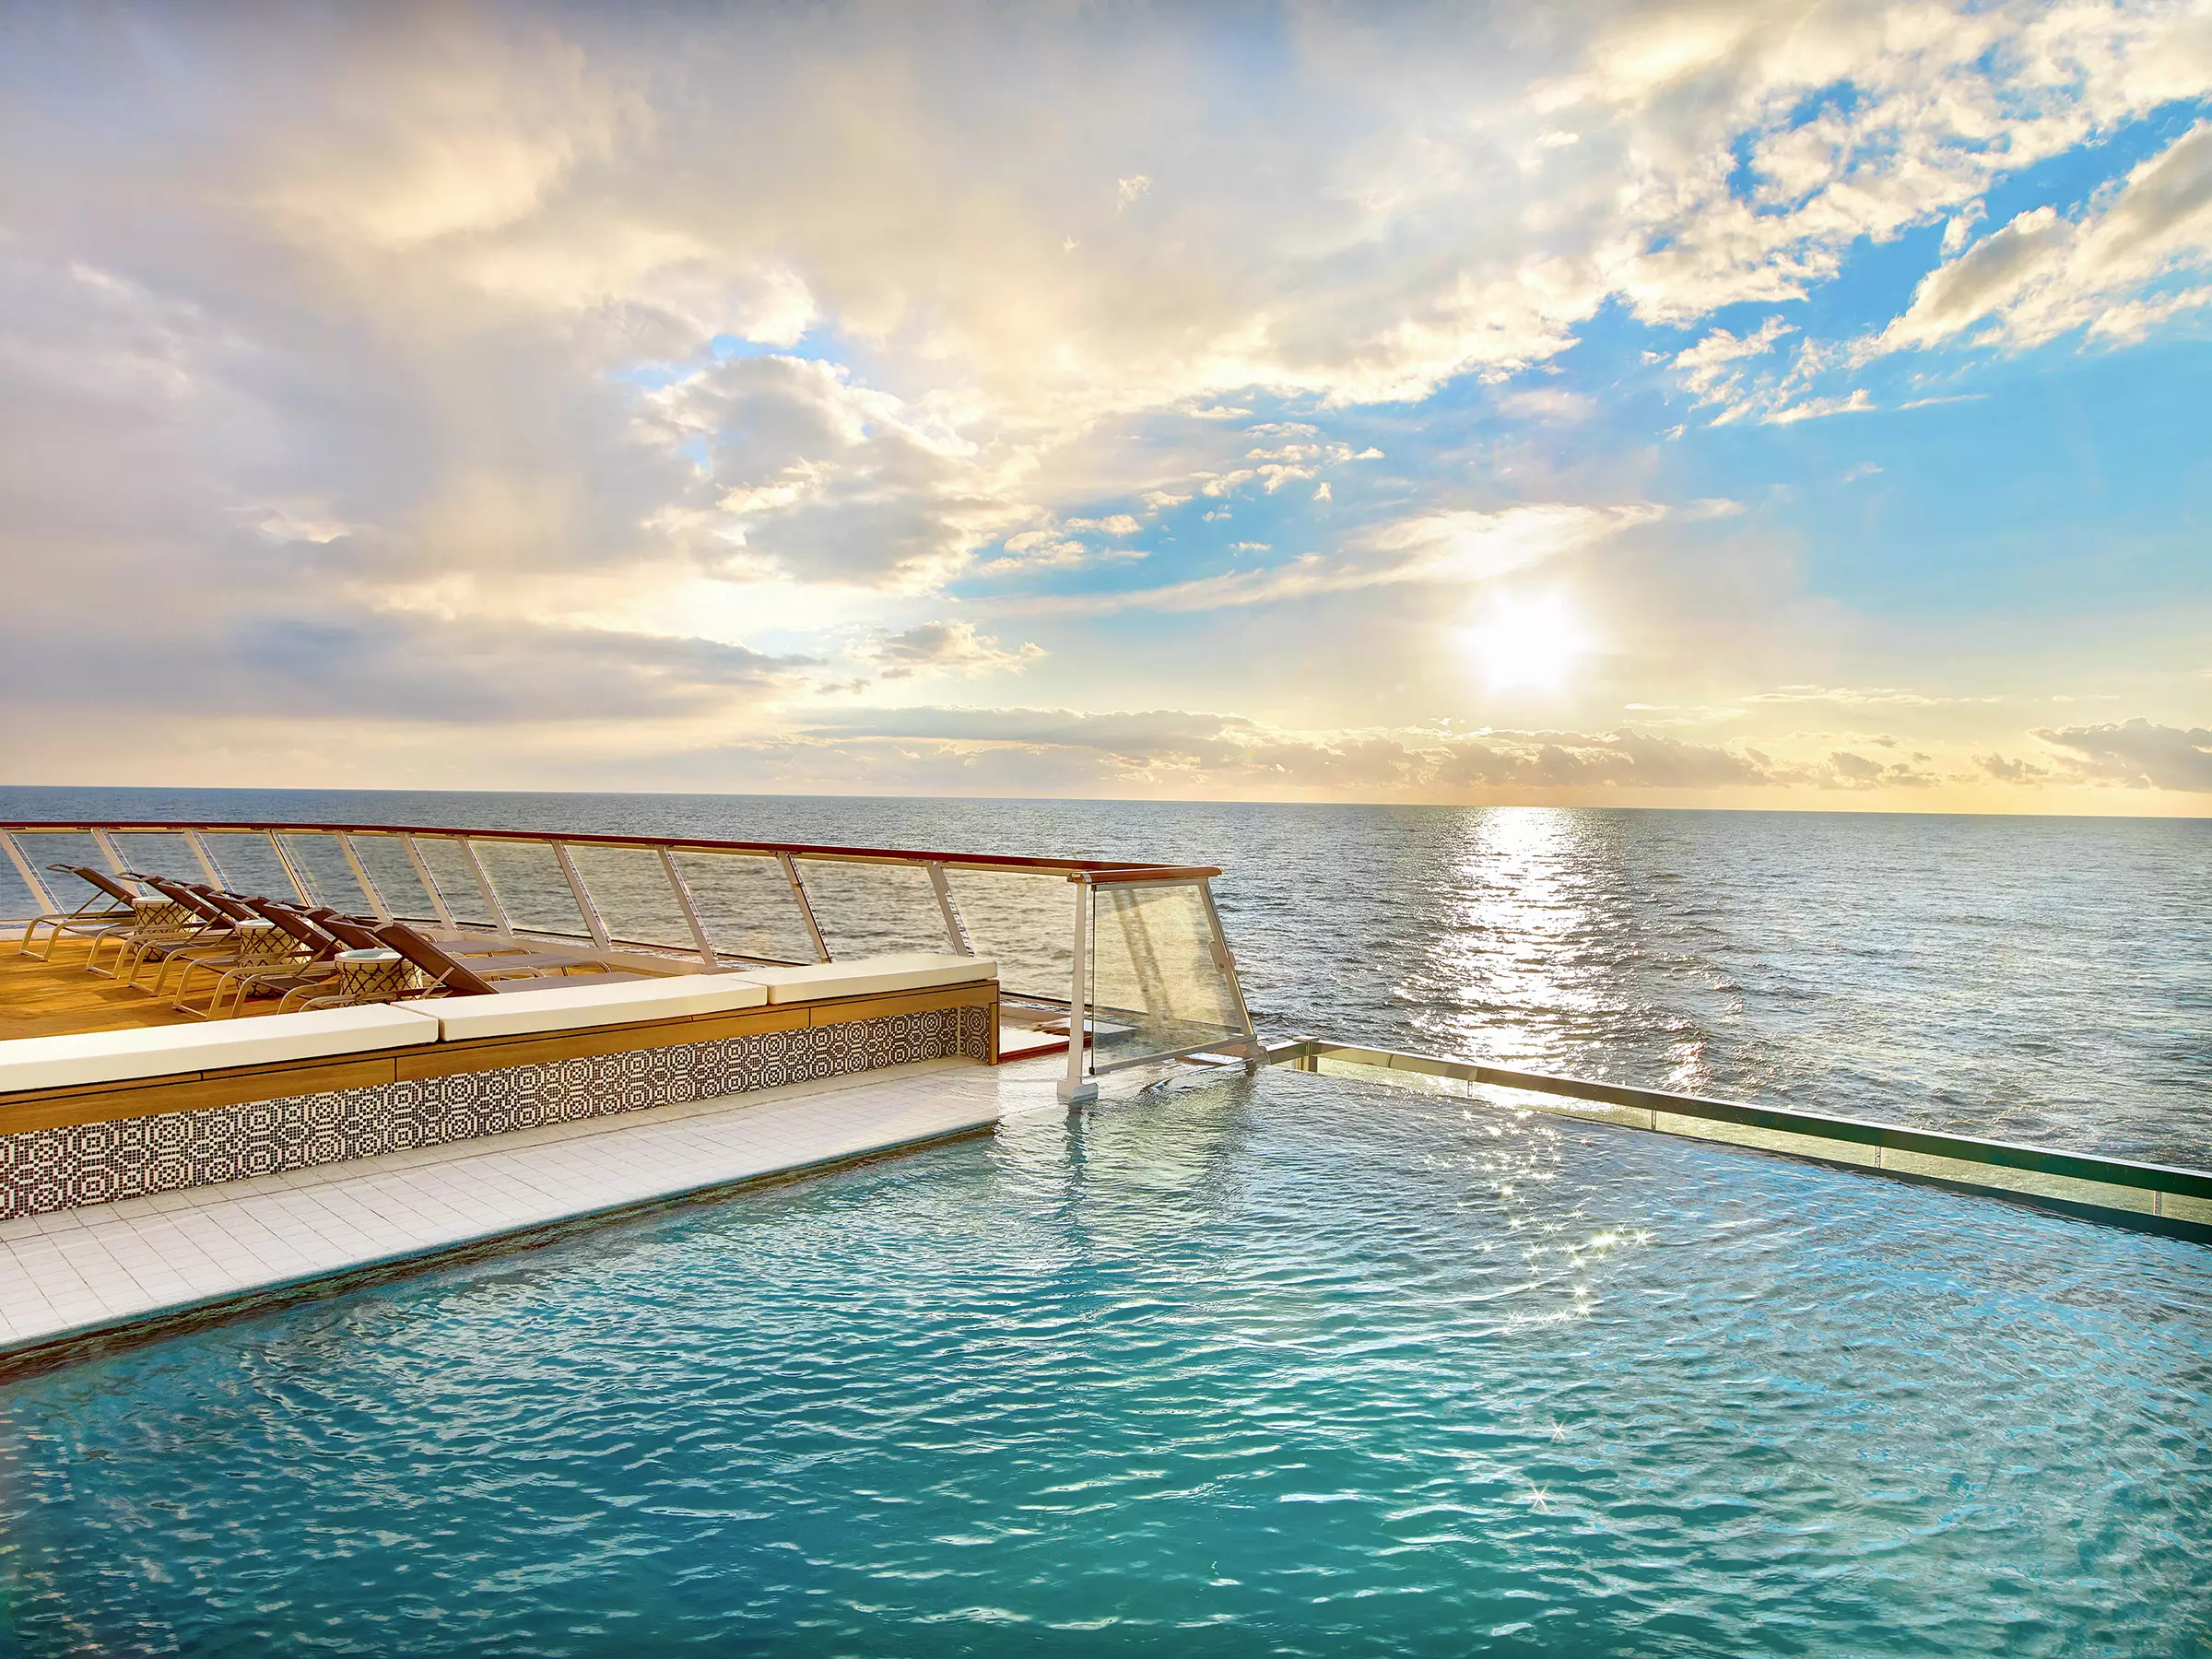 Your cruise ship includes an infinity pool.